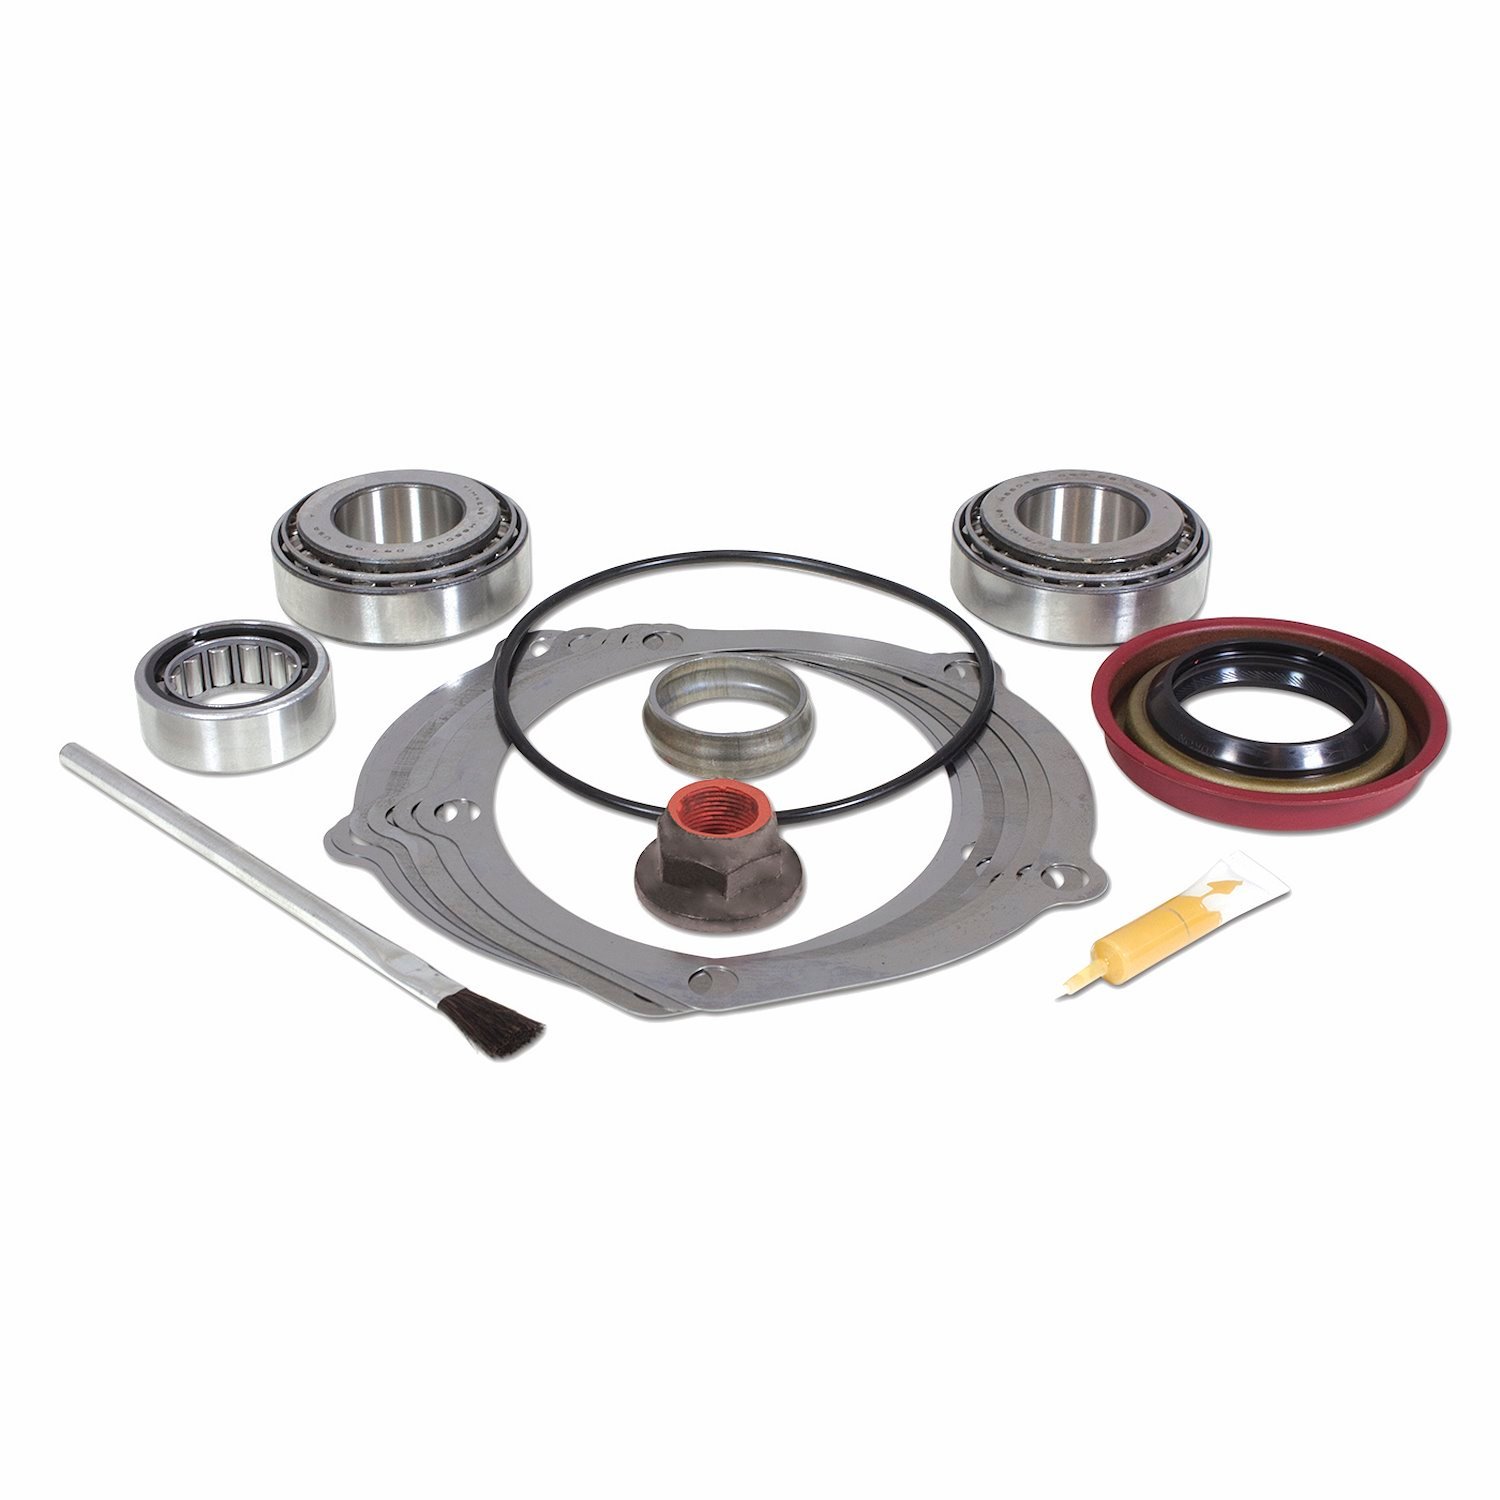 Pinion Install Kit For Ford 9 in. Differential, 28 Spline, Oversize